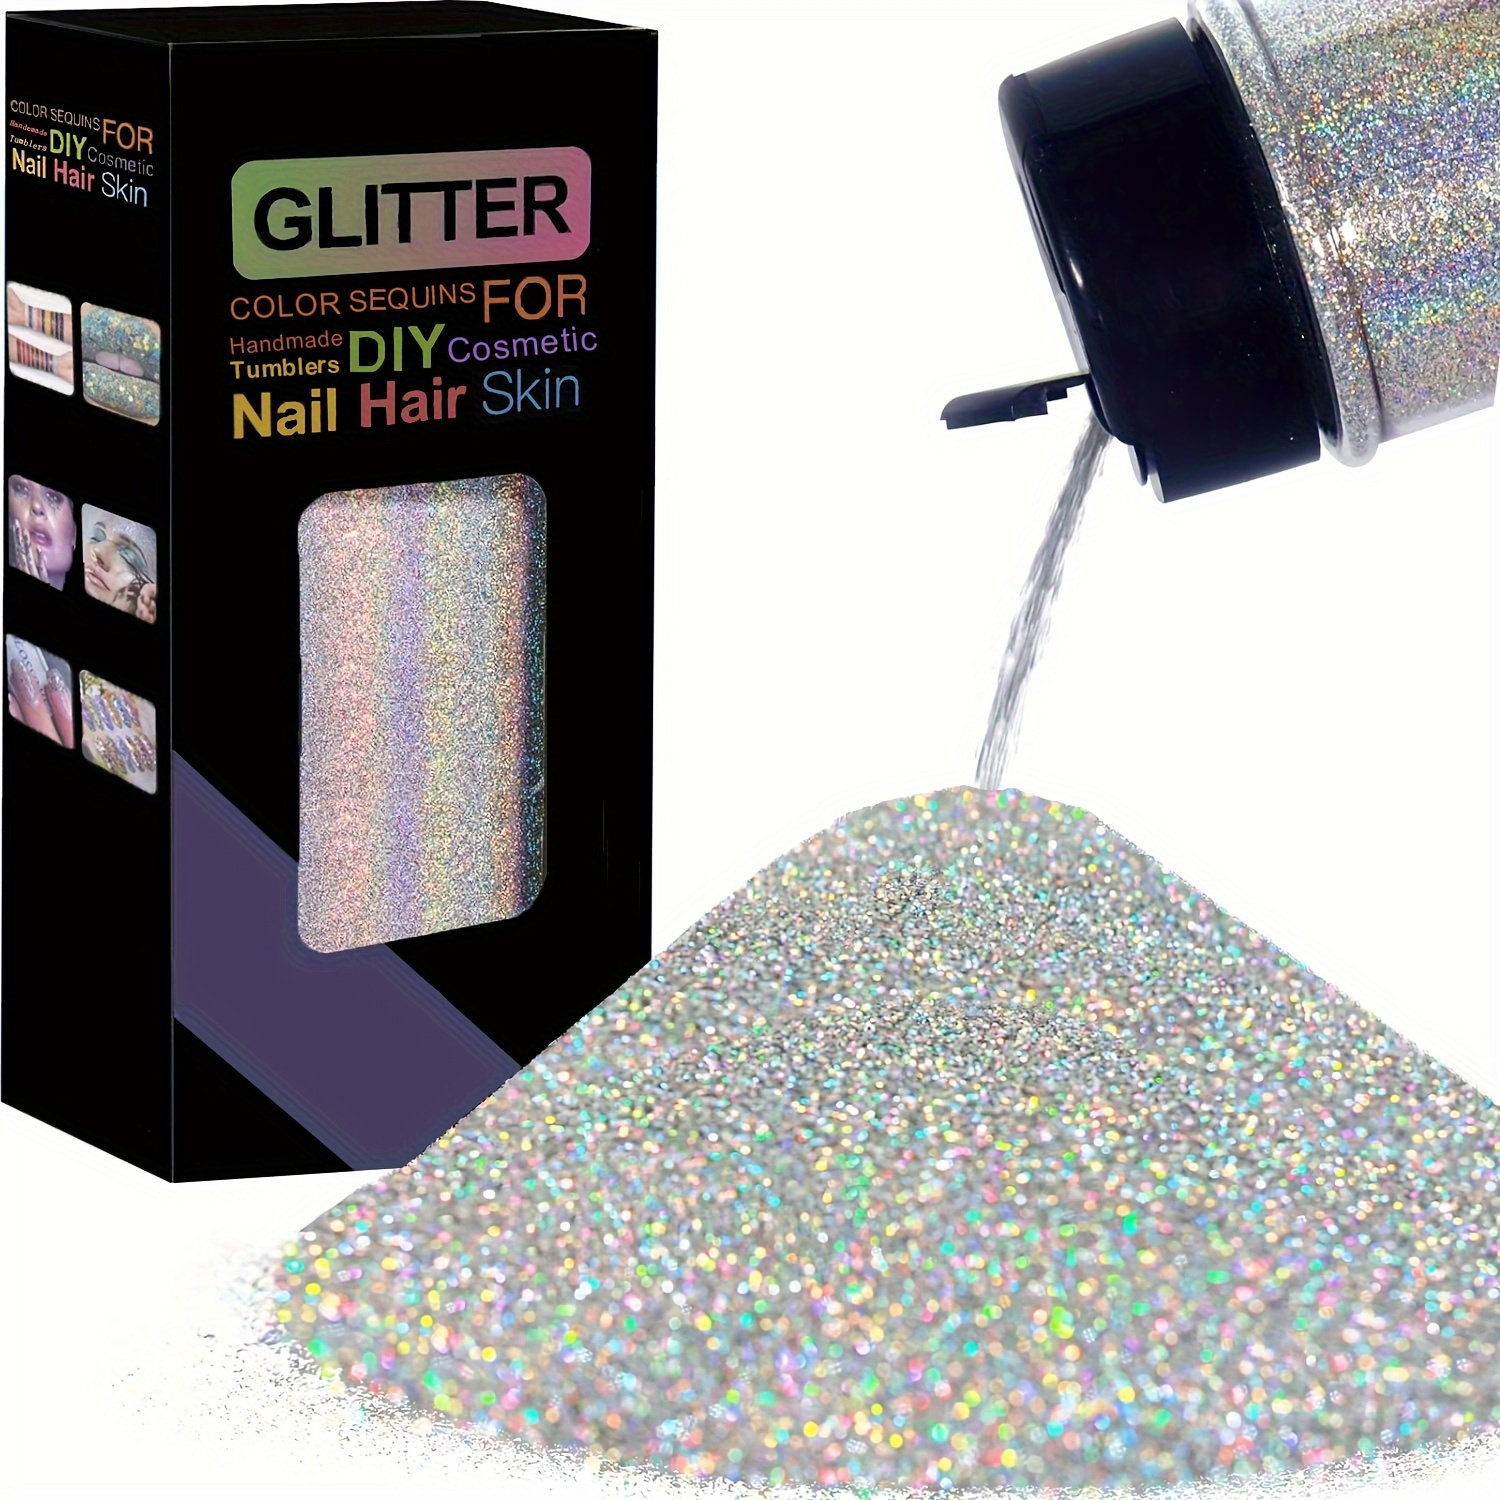 Baby Yellow Glitter, Decorative Glitter for Crafts, Art, Body, Nails.  Non-Toxic Ingredients (4 Gram Jar)